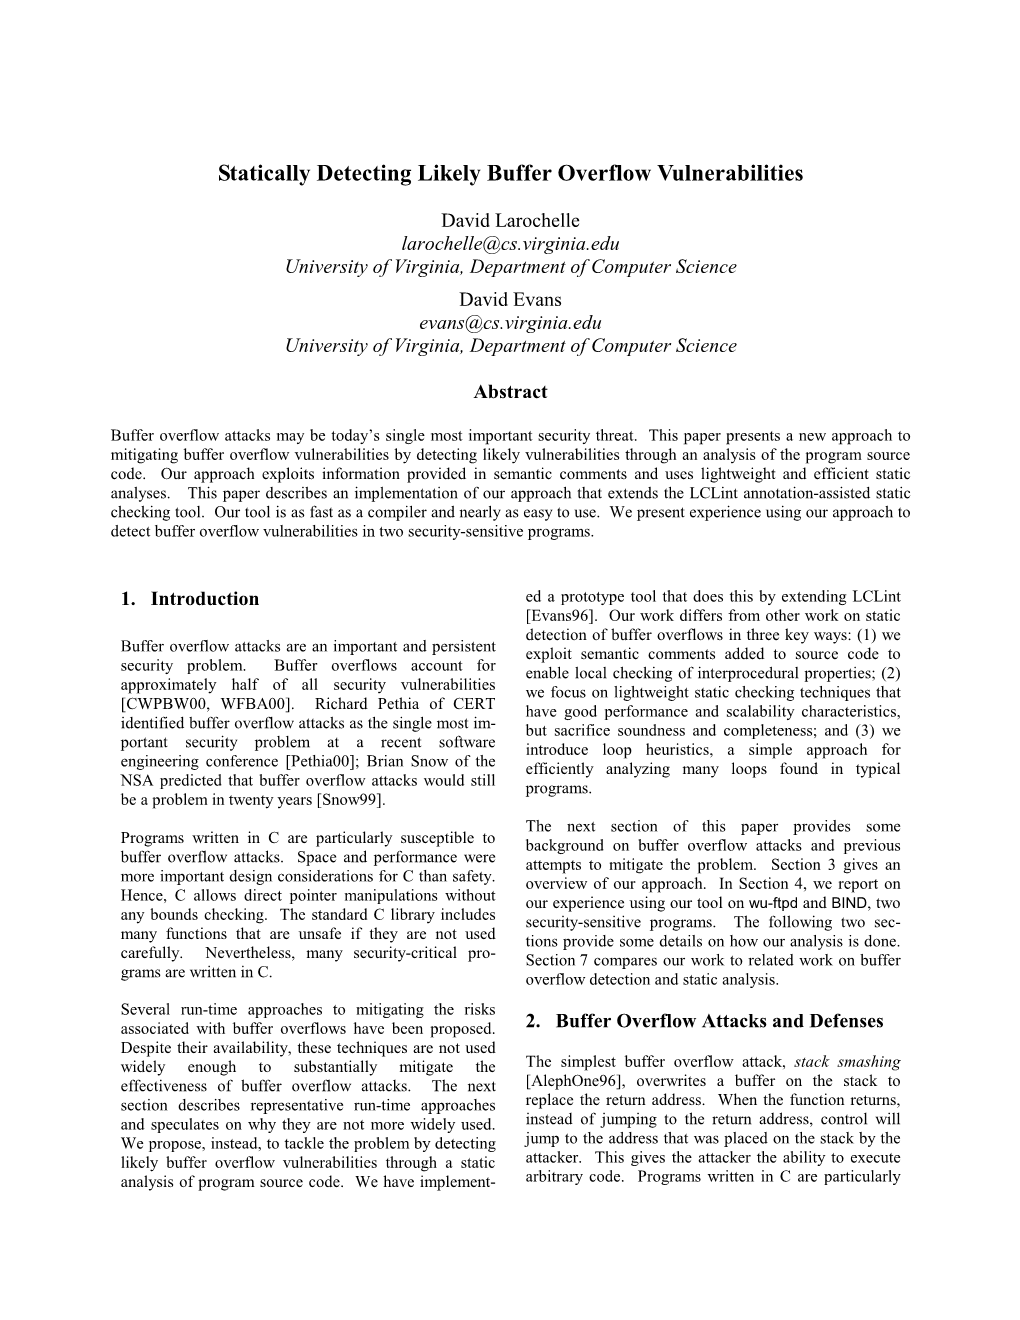 Statically Detecting Likely Buffer Overflow Vulnerabilities